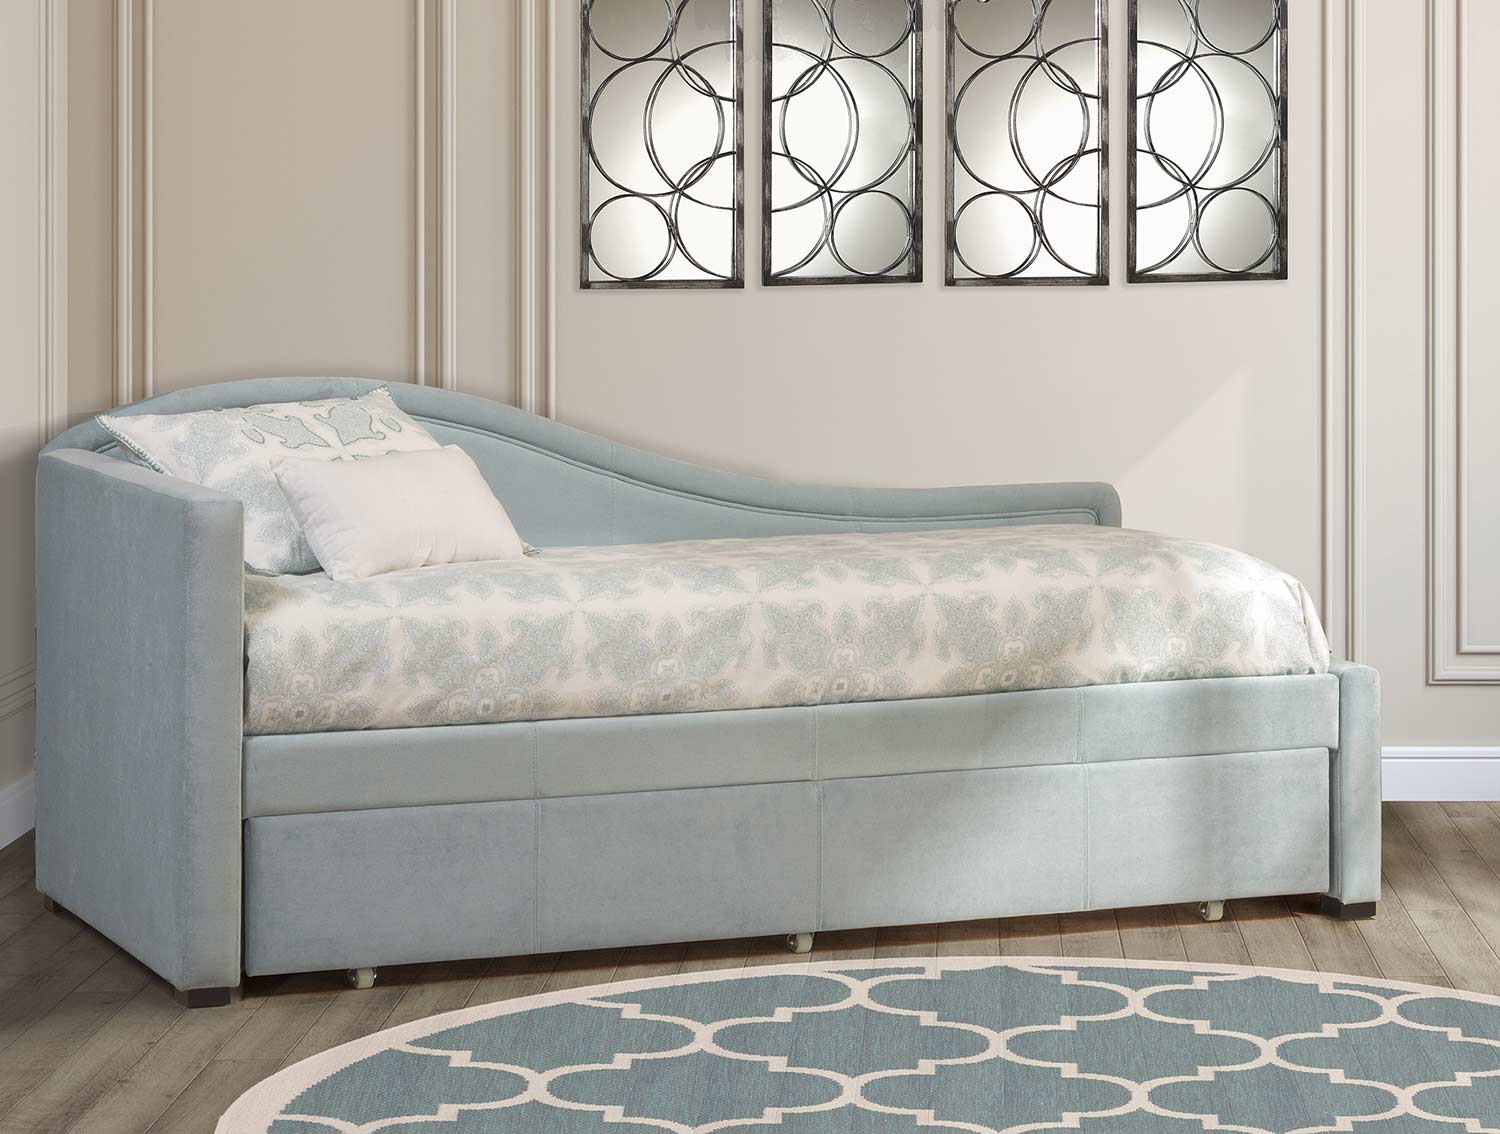 Hillsdale Olivia Daybed with Trundle - Spa/Aqua Blue